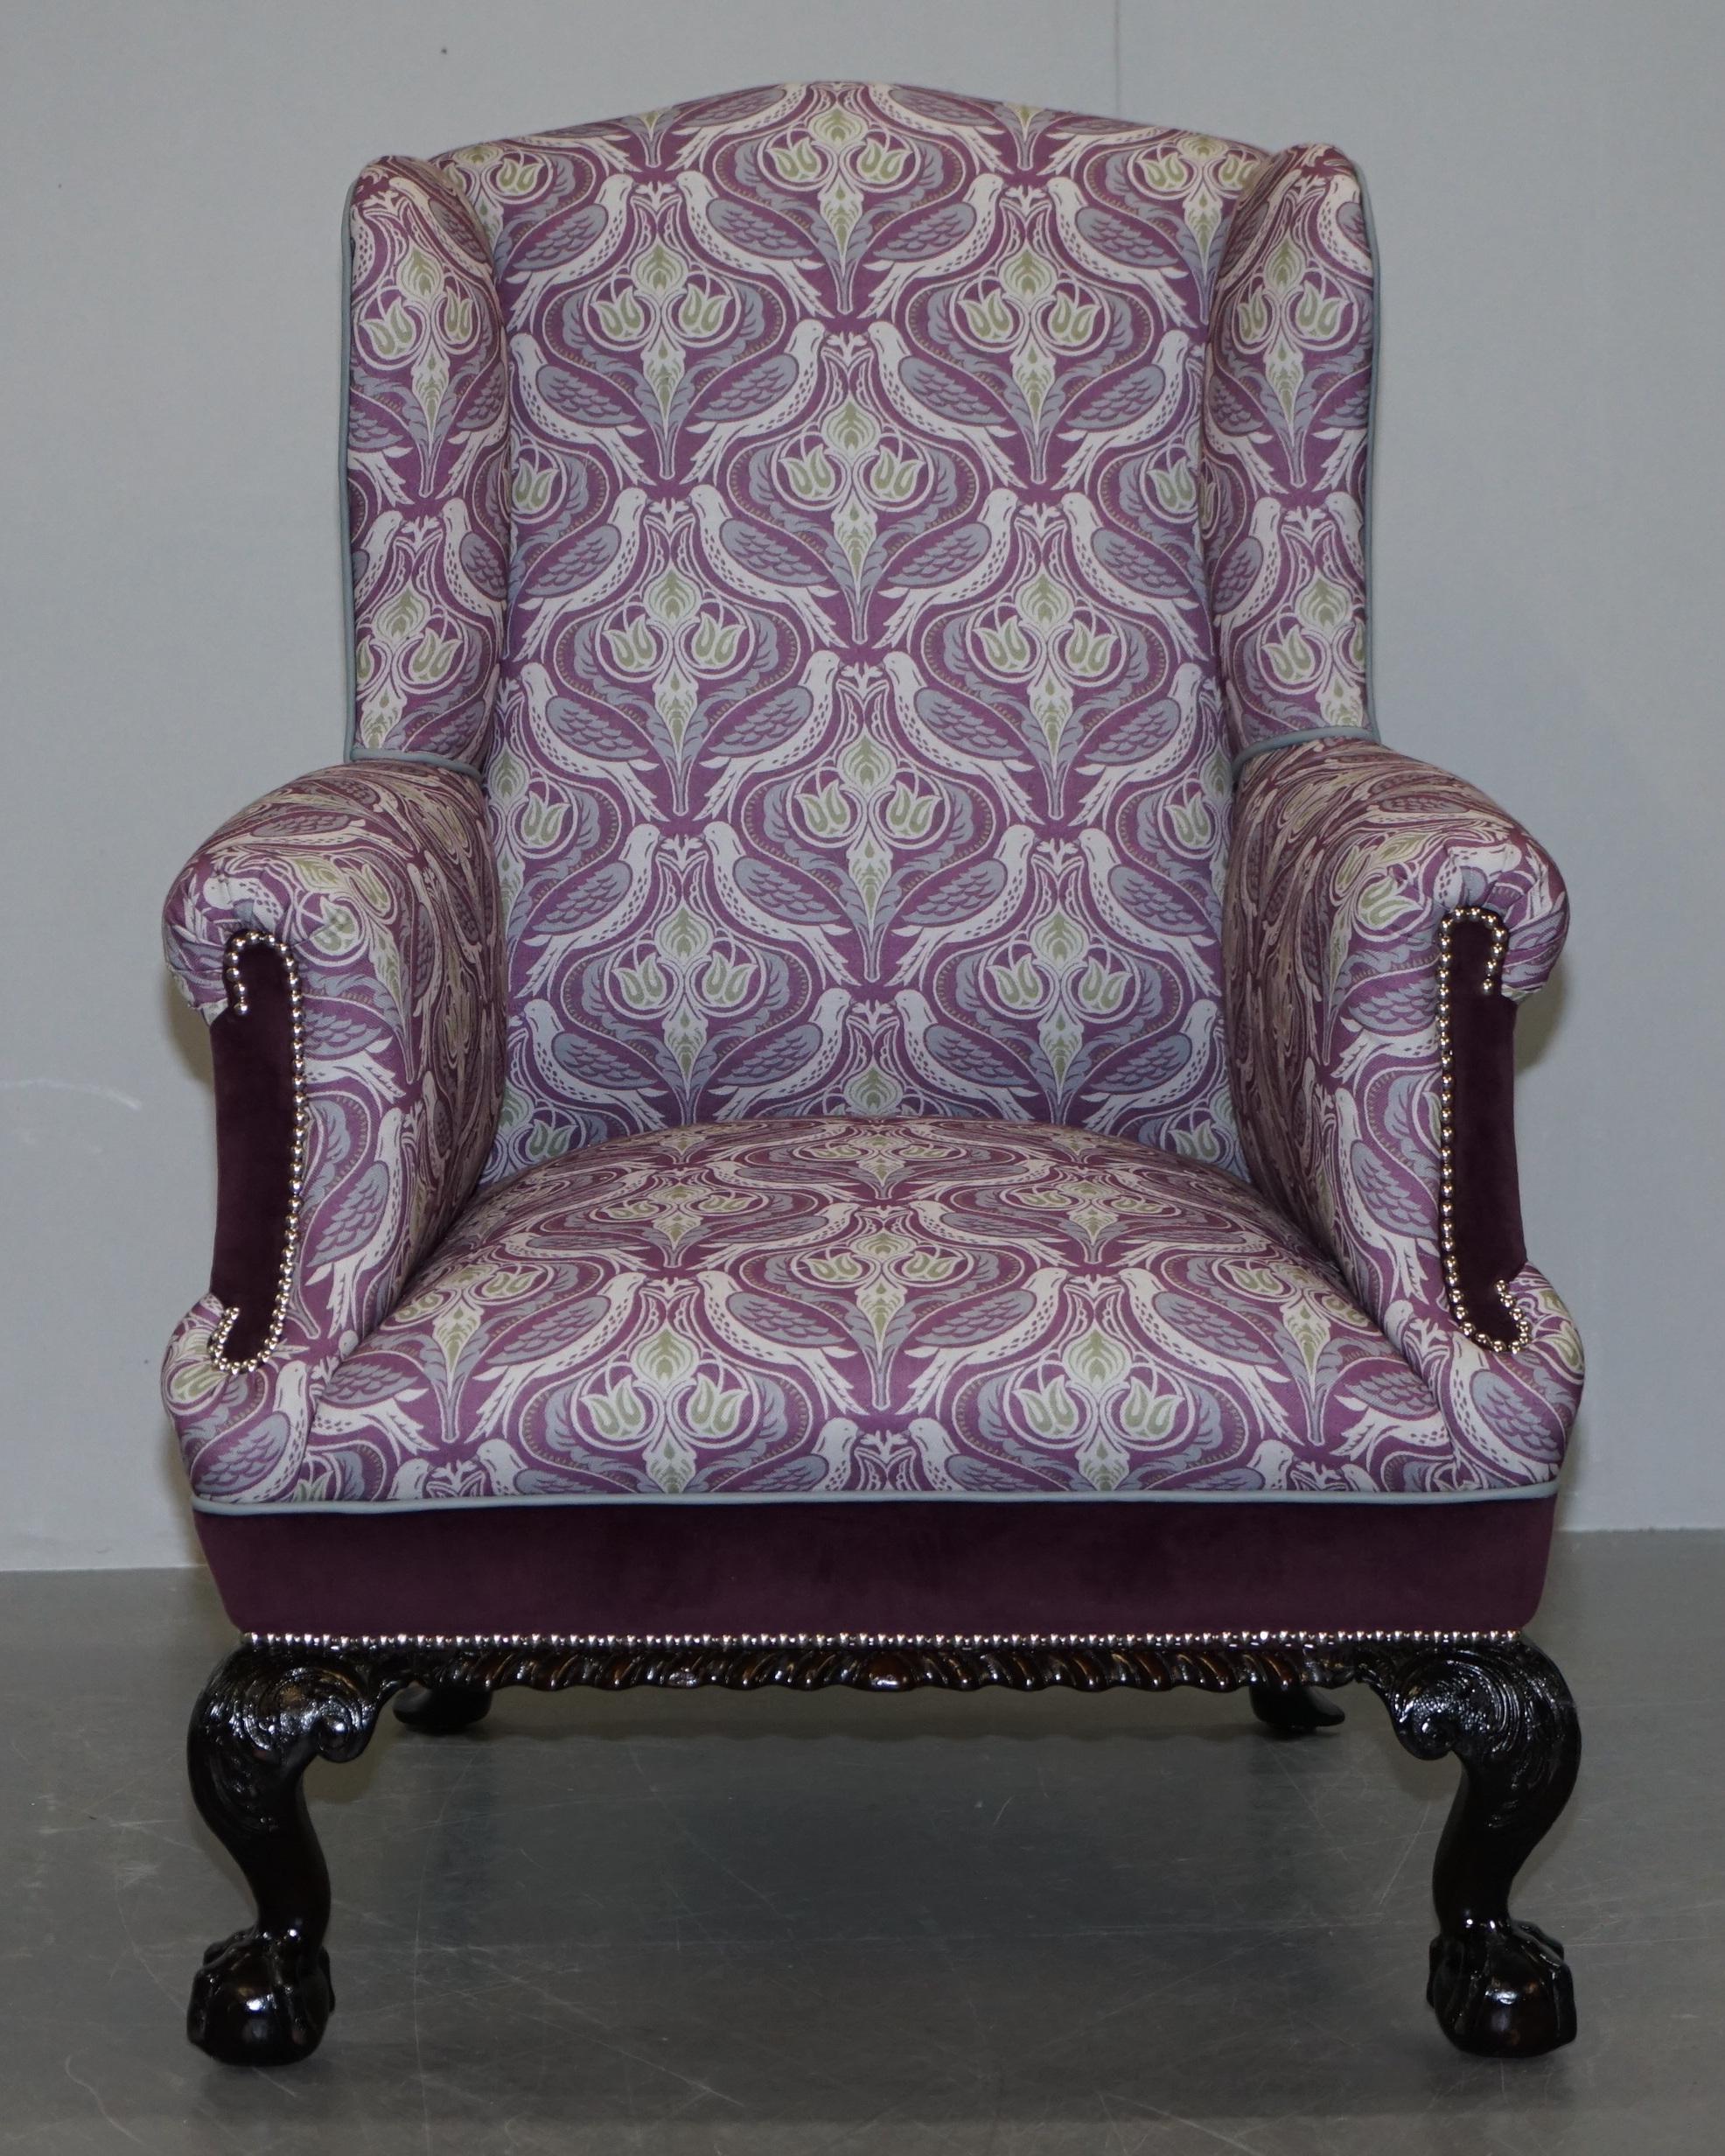 We are delighted to offer for sale this lovely fully restored Victorian wingback armchair with ornately carved frame and claw and ball feet

A very nicely restored piece, the chair has been stripped back and reupholstered with luxury purple velvet